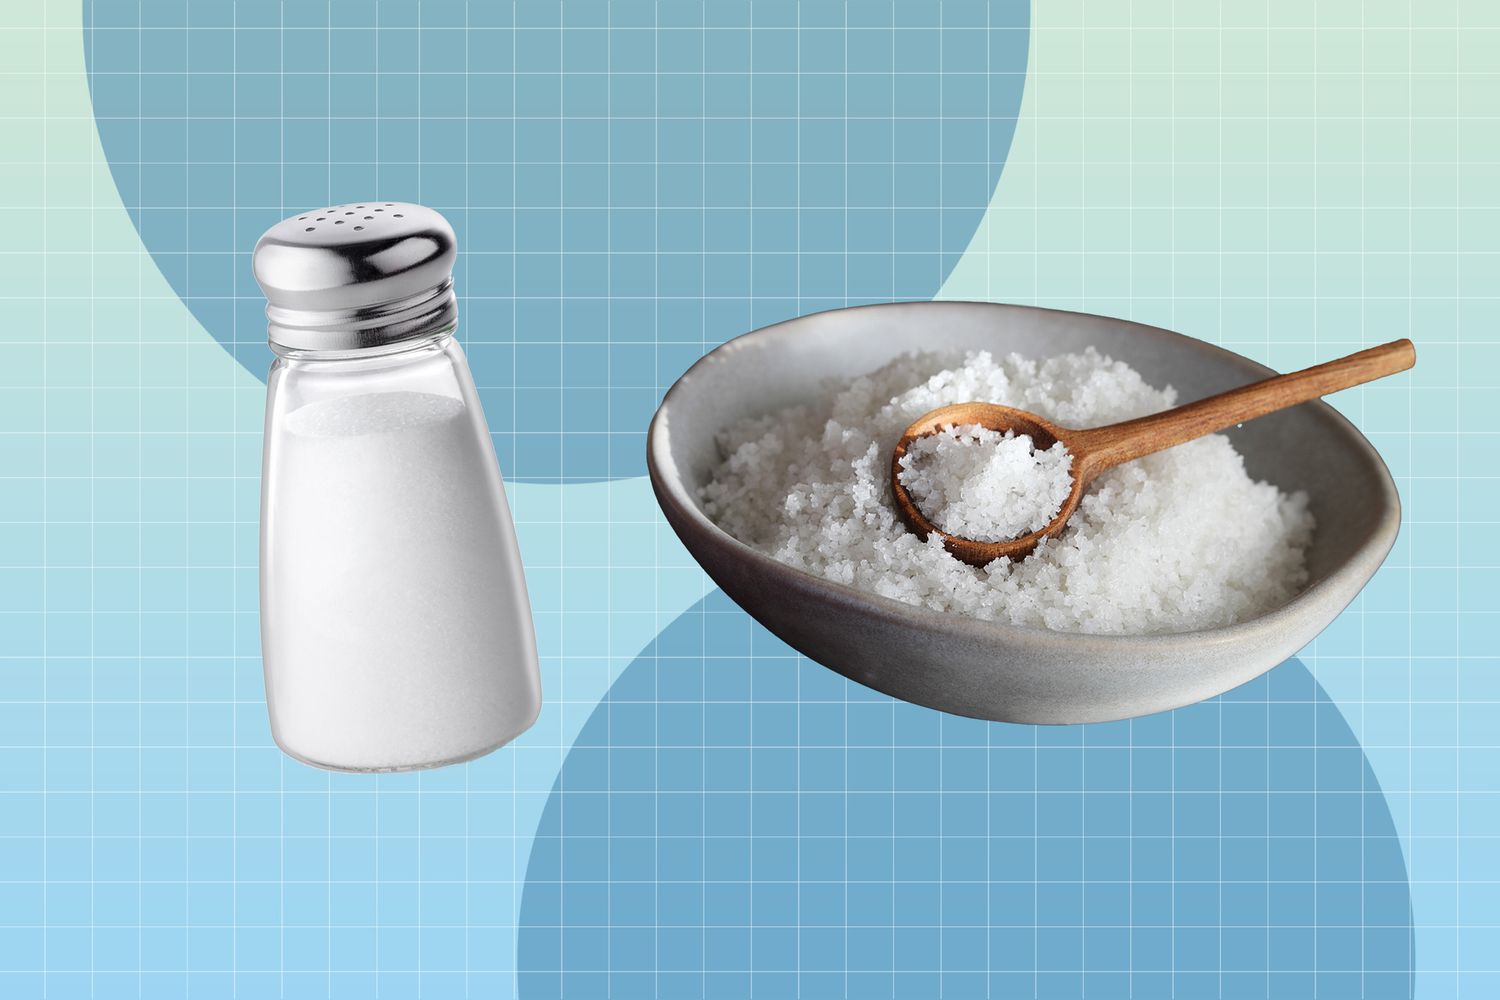 Sea Salt vs. Table Salt: What's the Difference? | EatingWell